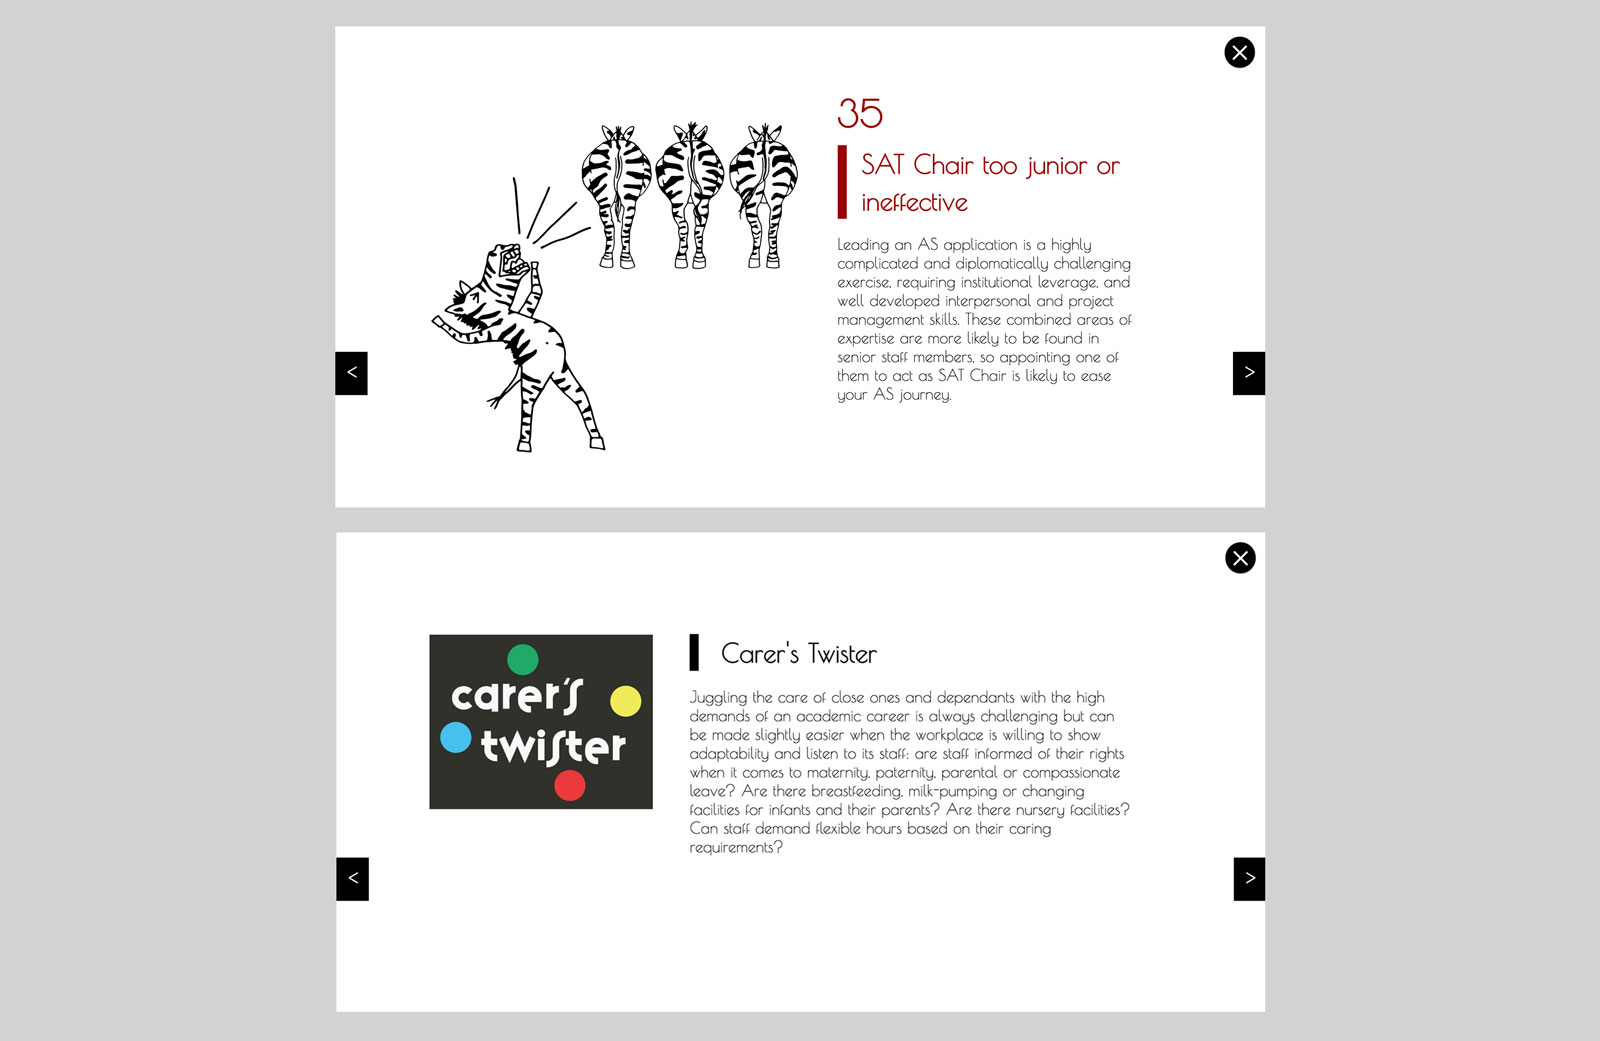 top: illustration of a zebra shouting to the backs of 3 other zebras with accompanying text, bottom: made up graphic of carers twister with accompanying text